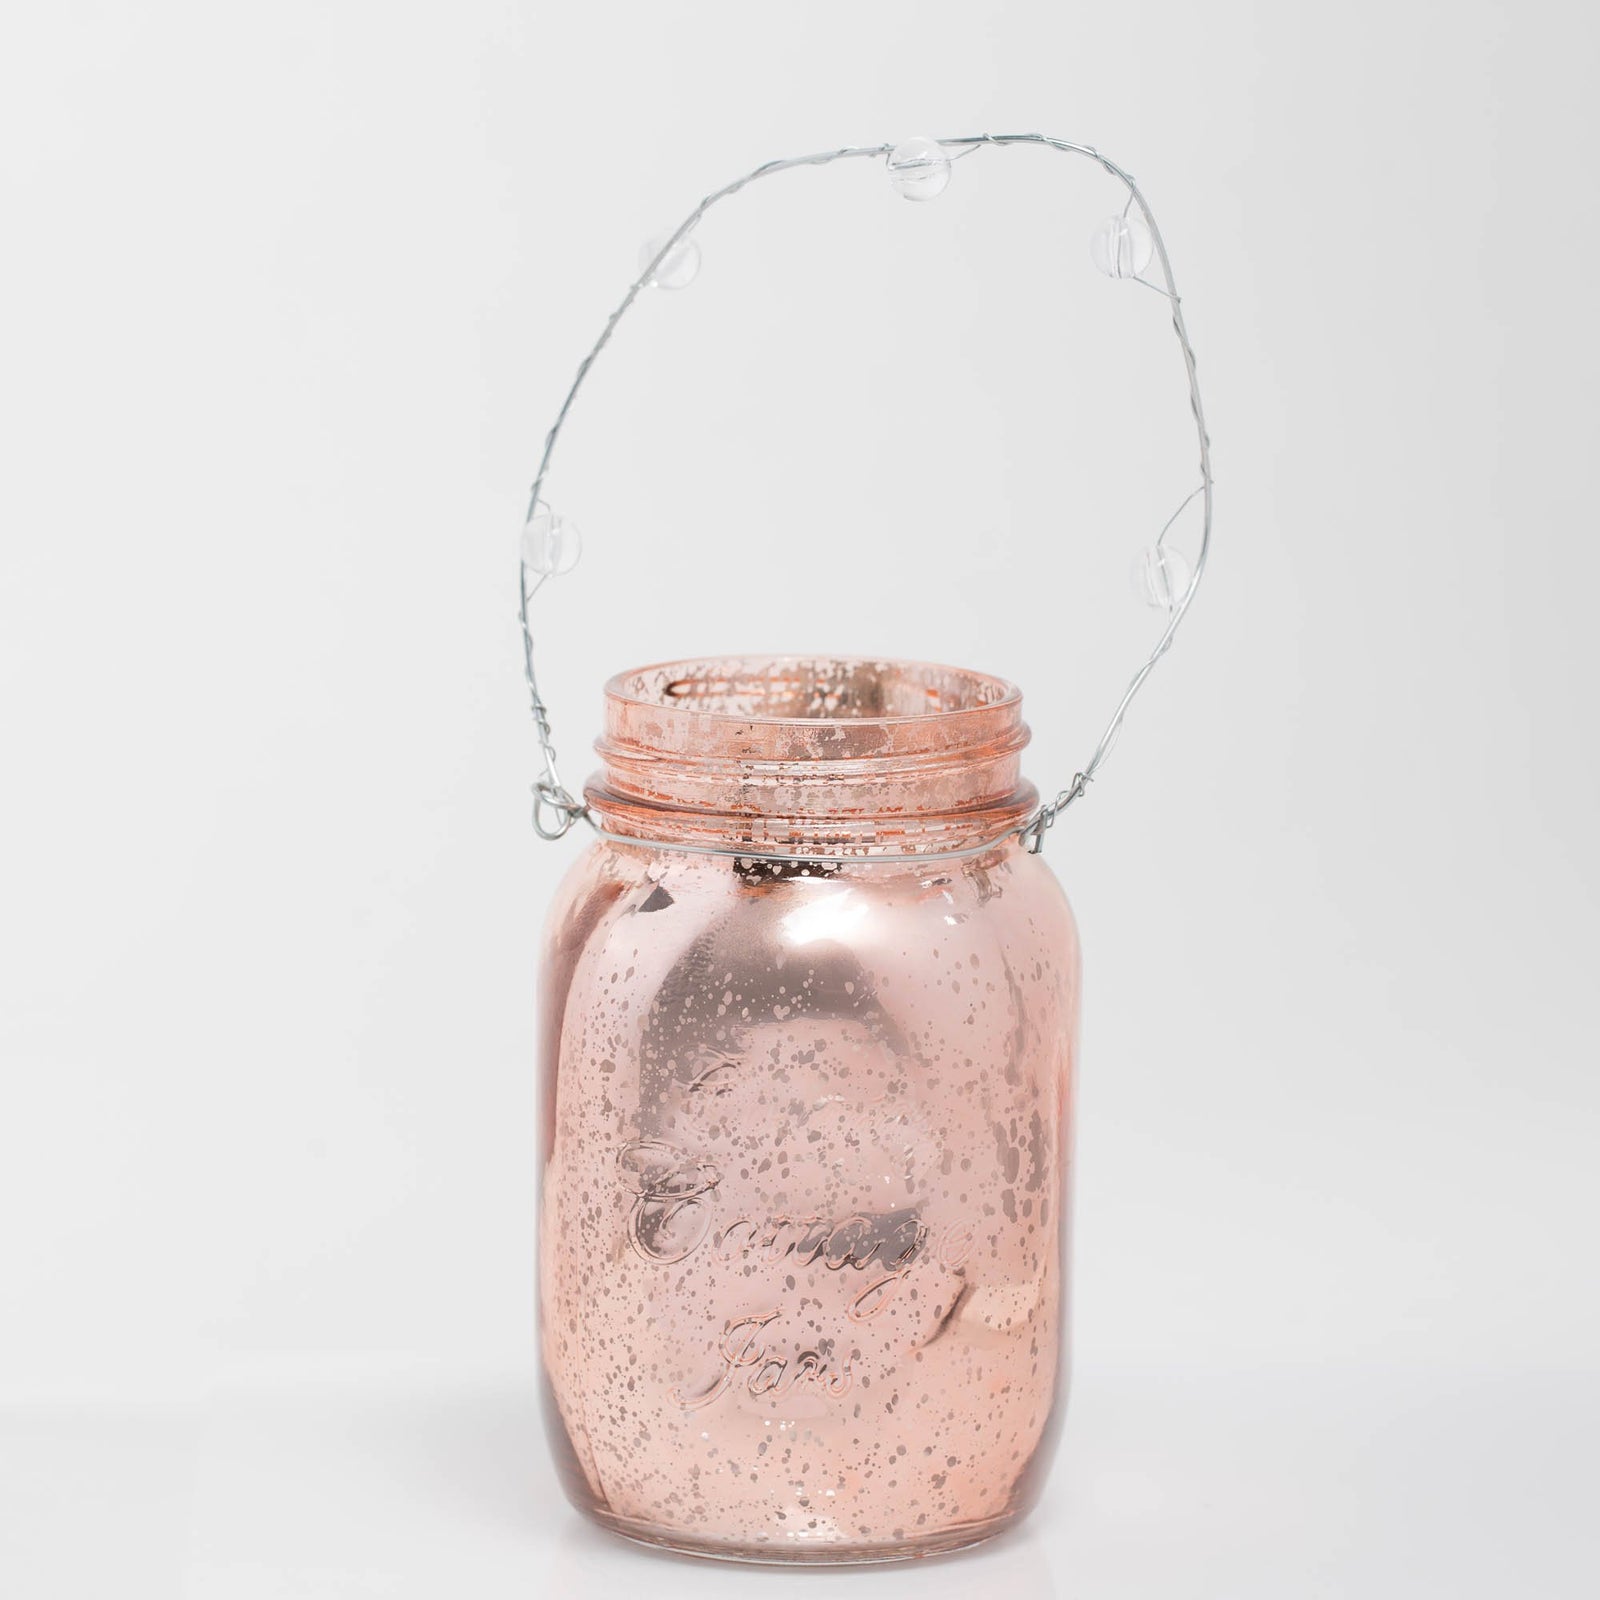 Richland Small Mercury Hanging Mason Jar with Clear Bead Handle - Rose Gold Set of 12 by Quick Candles